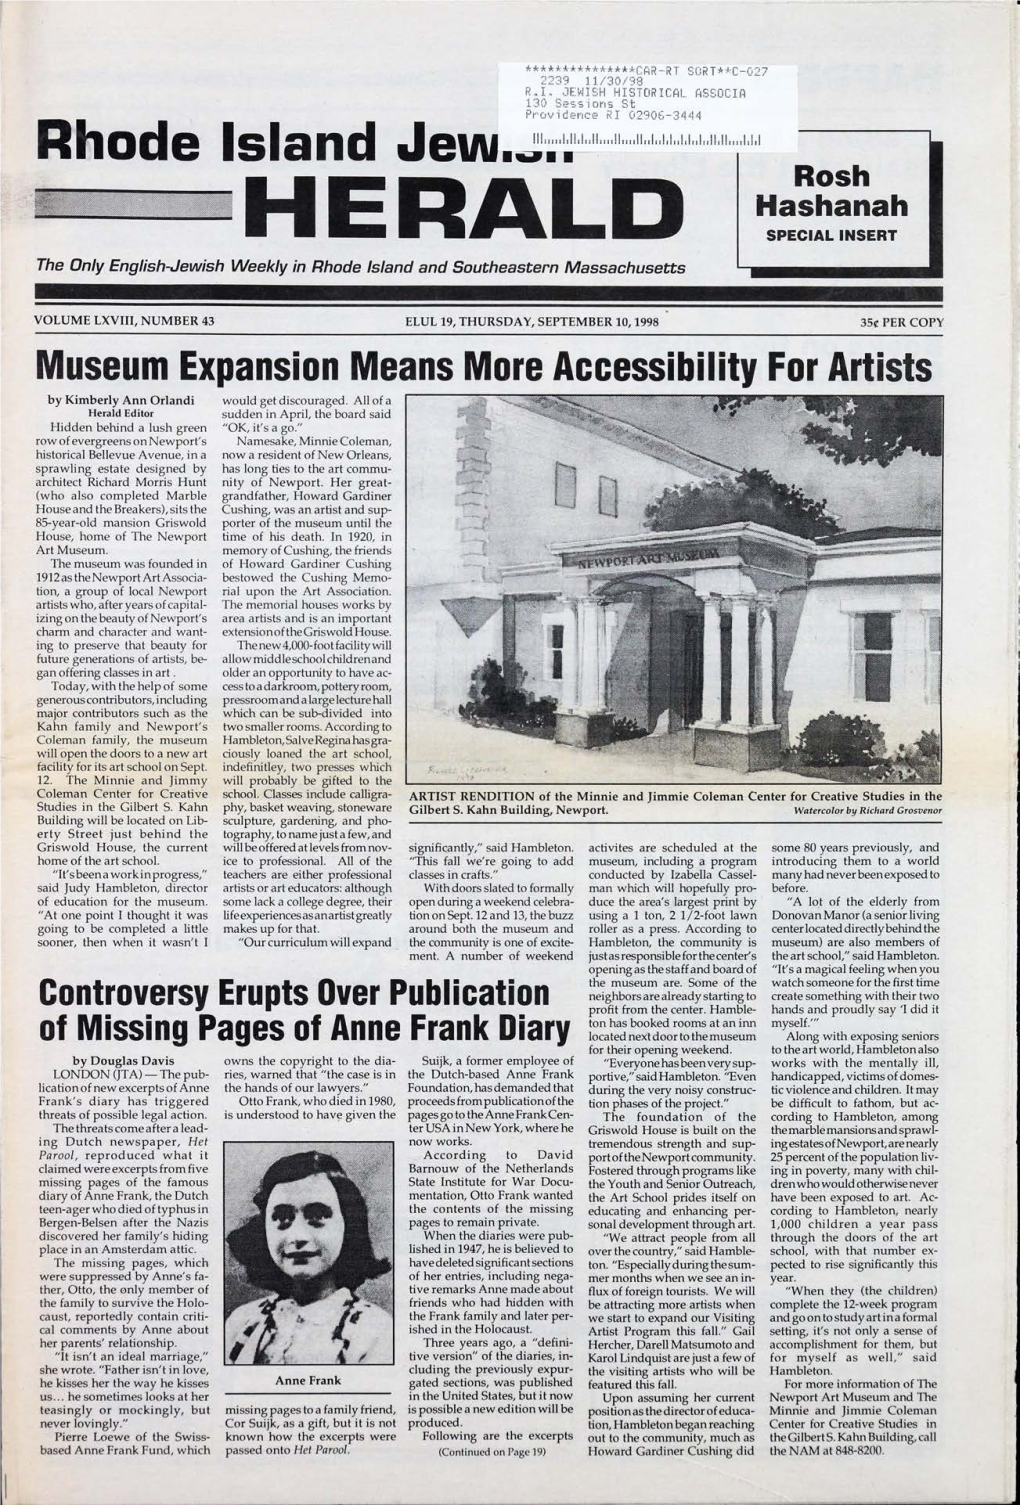 SEPTEMBER 10, 1998 35¢ PER COPY Museum Expansion Means More Accessibility for Artists by Kimberly Ann Orlandi Would Get Discouraged